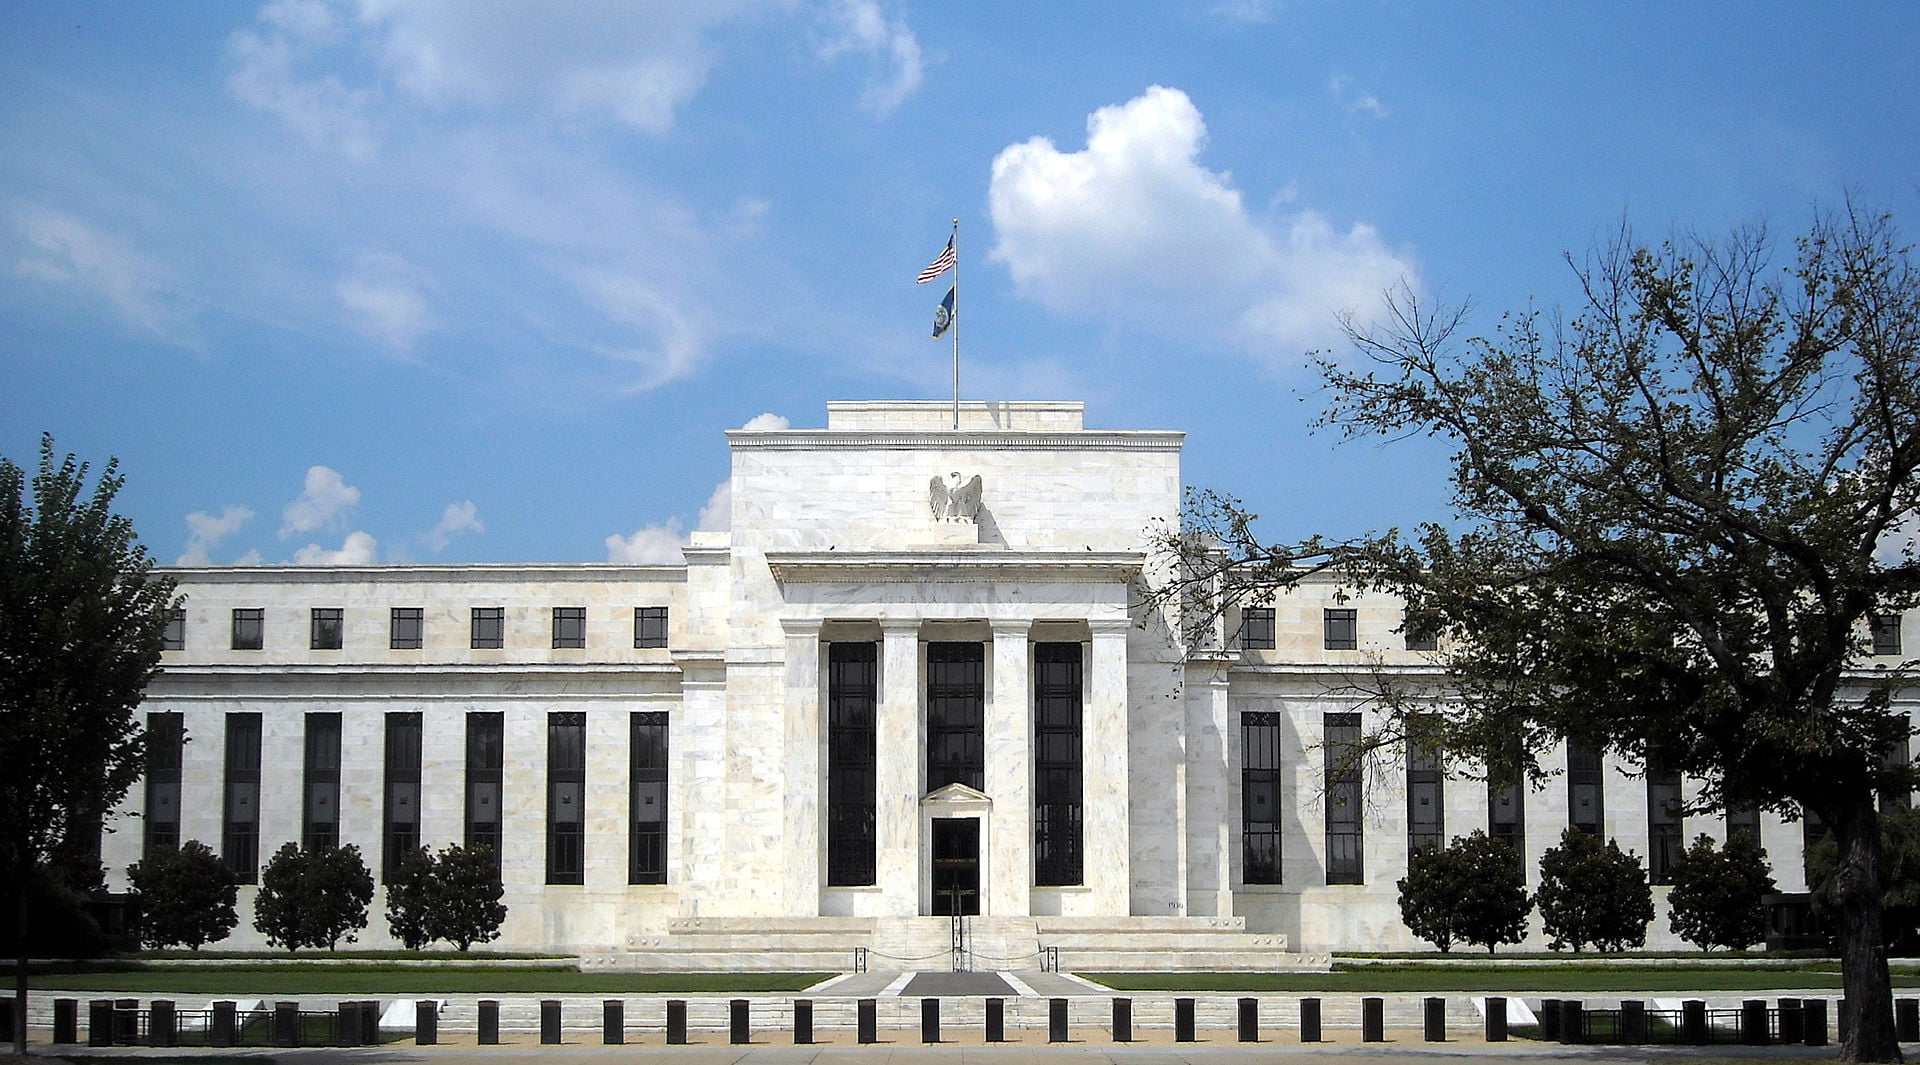 The Role and Tools of the Federal Reserve in Influencing the Economy